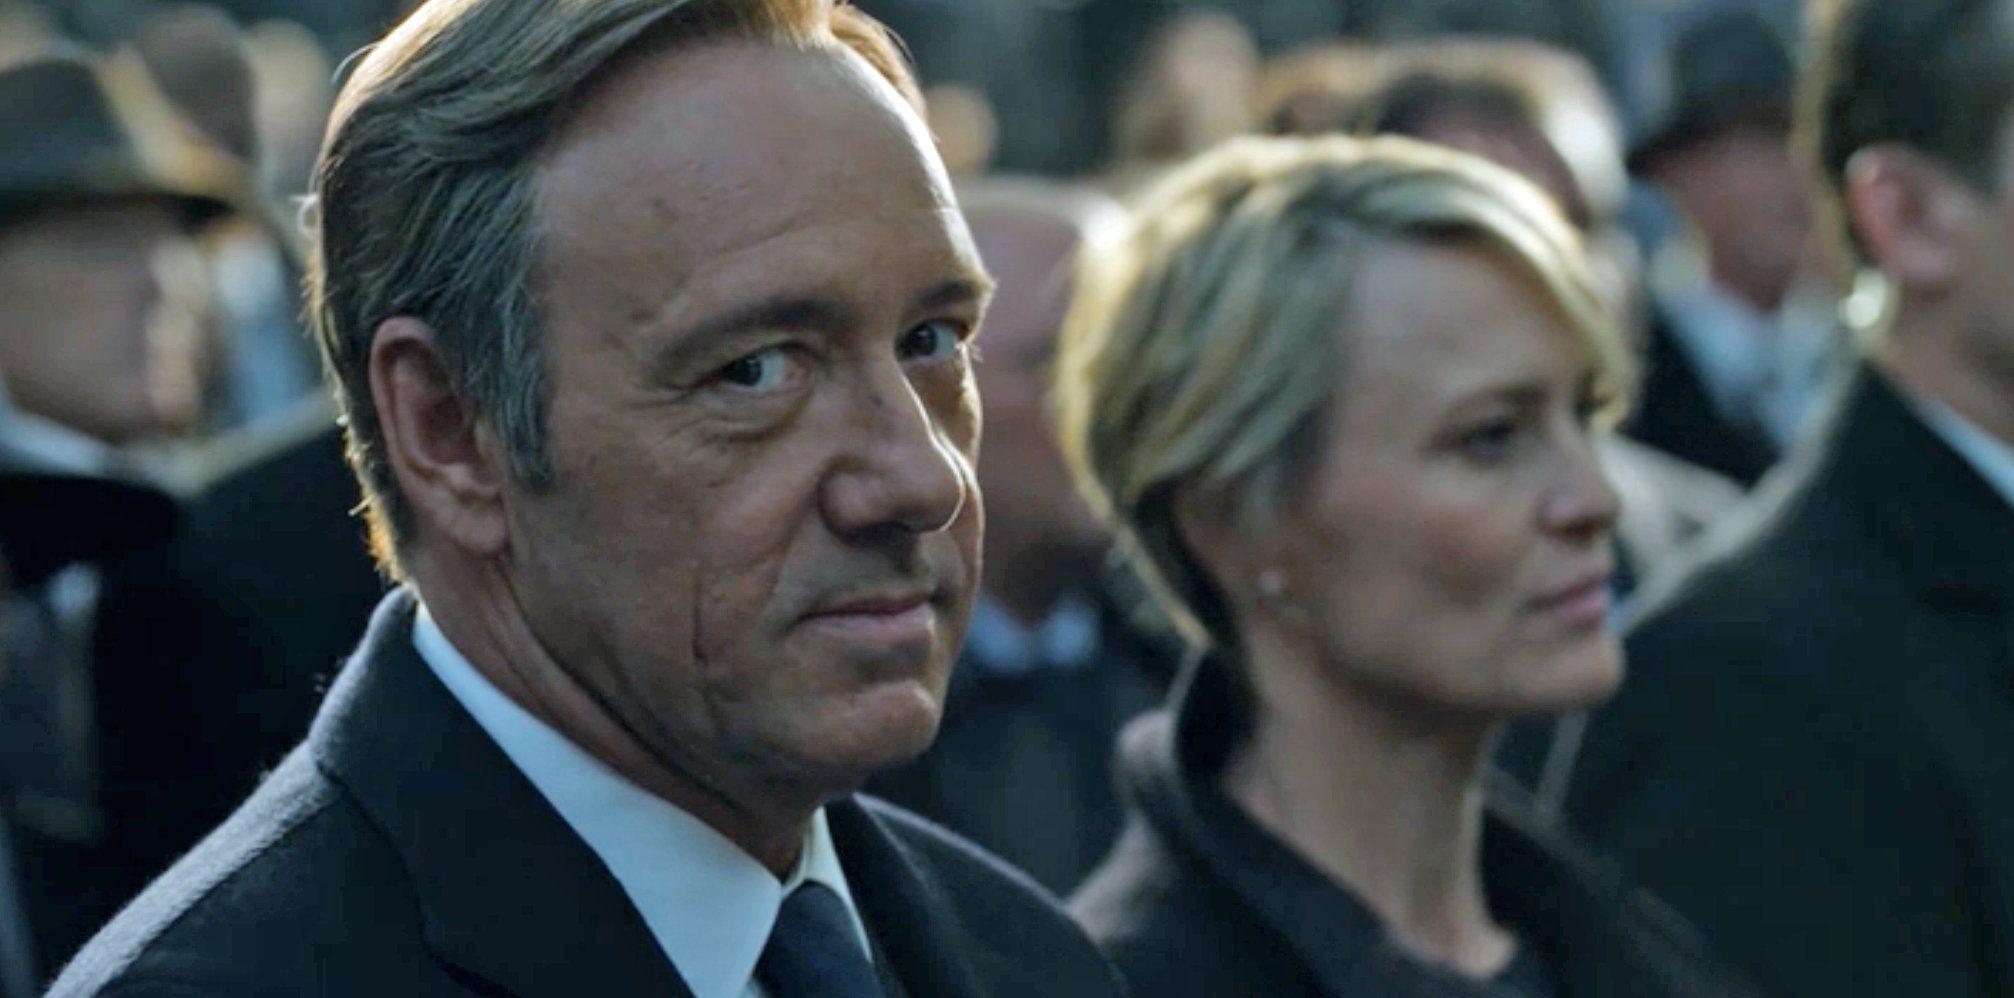 House of Cards wallpapers – wallpapers free download